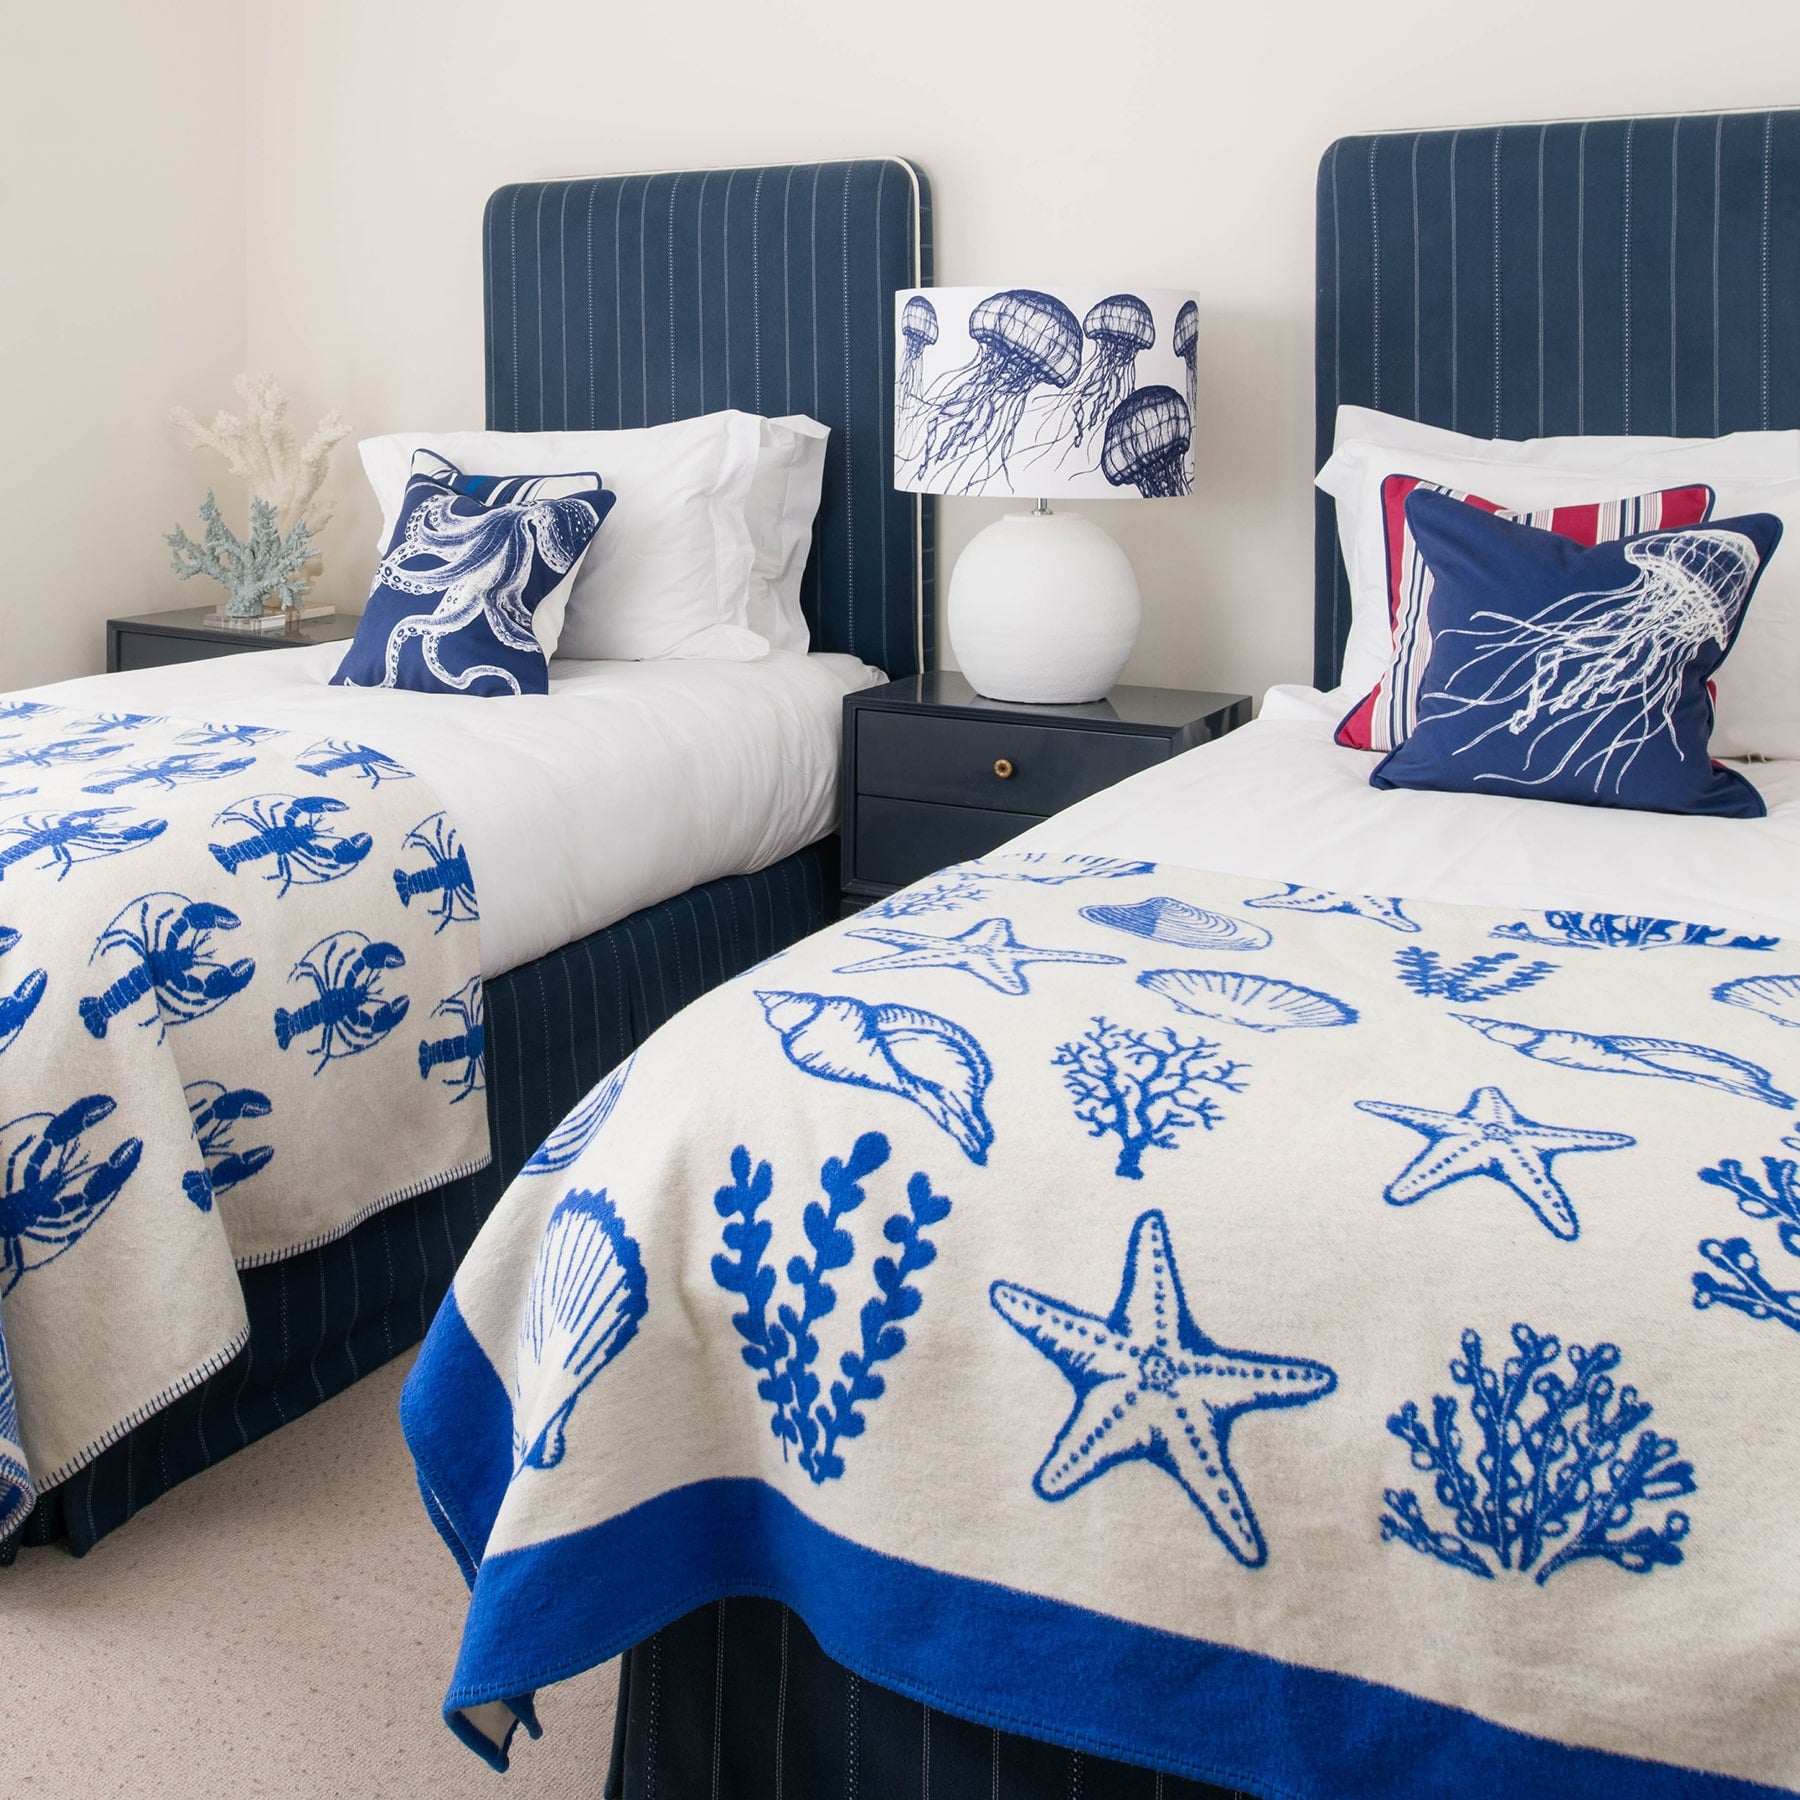 Our Classic Navy jellyfish design on a white background on a white lampbase on a side table between two single beds.On the beds are classic Navy and White cushions and our reversible throws are draped over the ends of the beds.